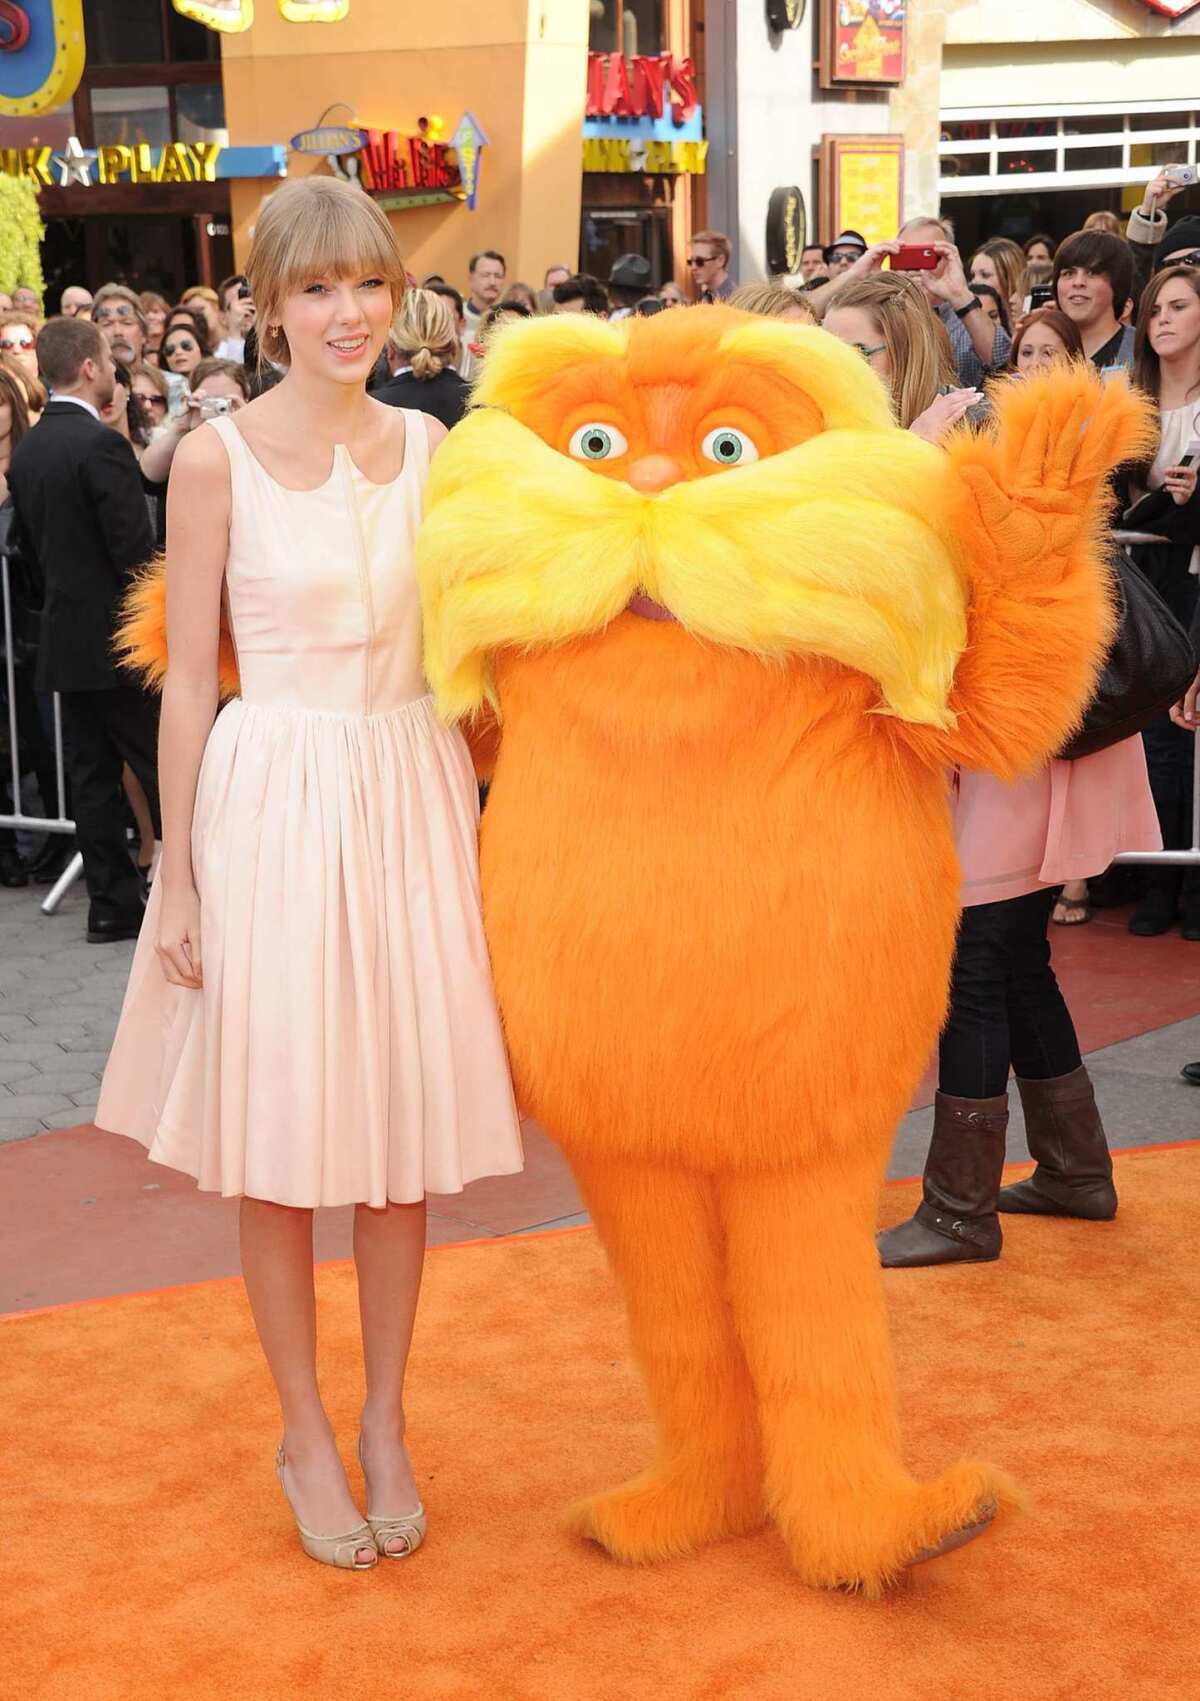 Taylor Swift stands in a pink dress with a fuzzy orange character.